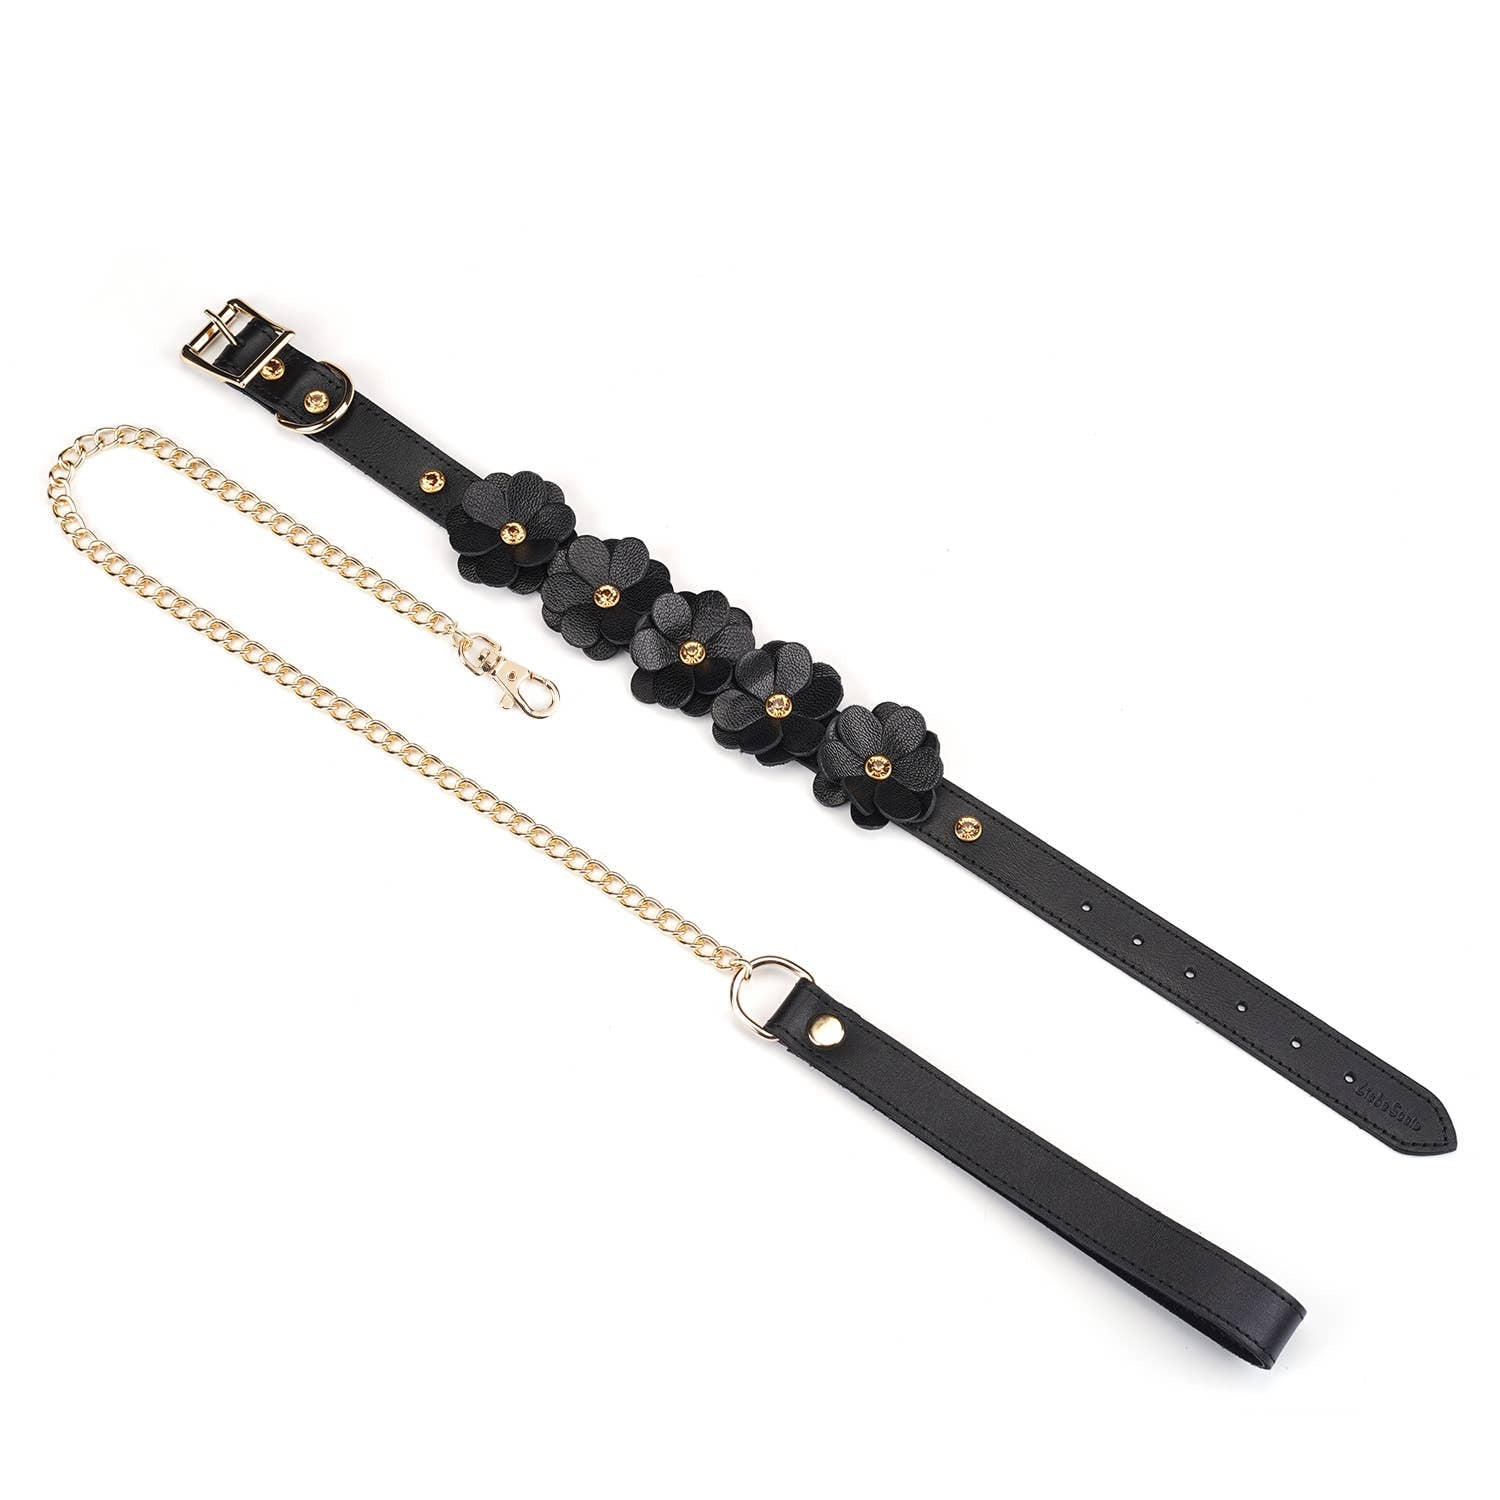  Black Leather Floral Collar with Leash Kink by Liebe Seele- The Nookie